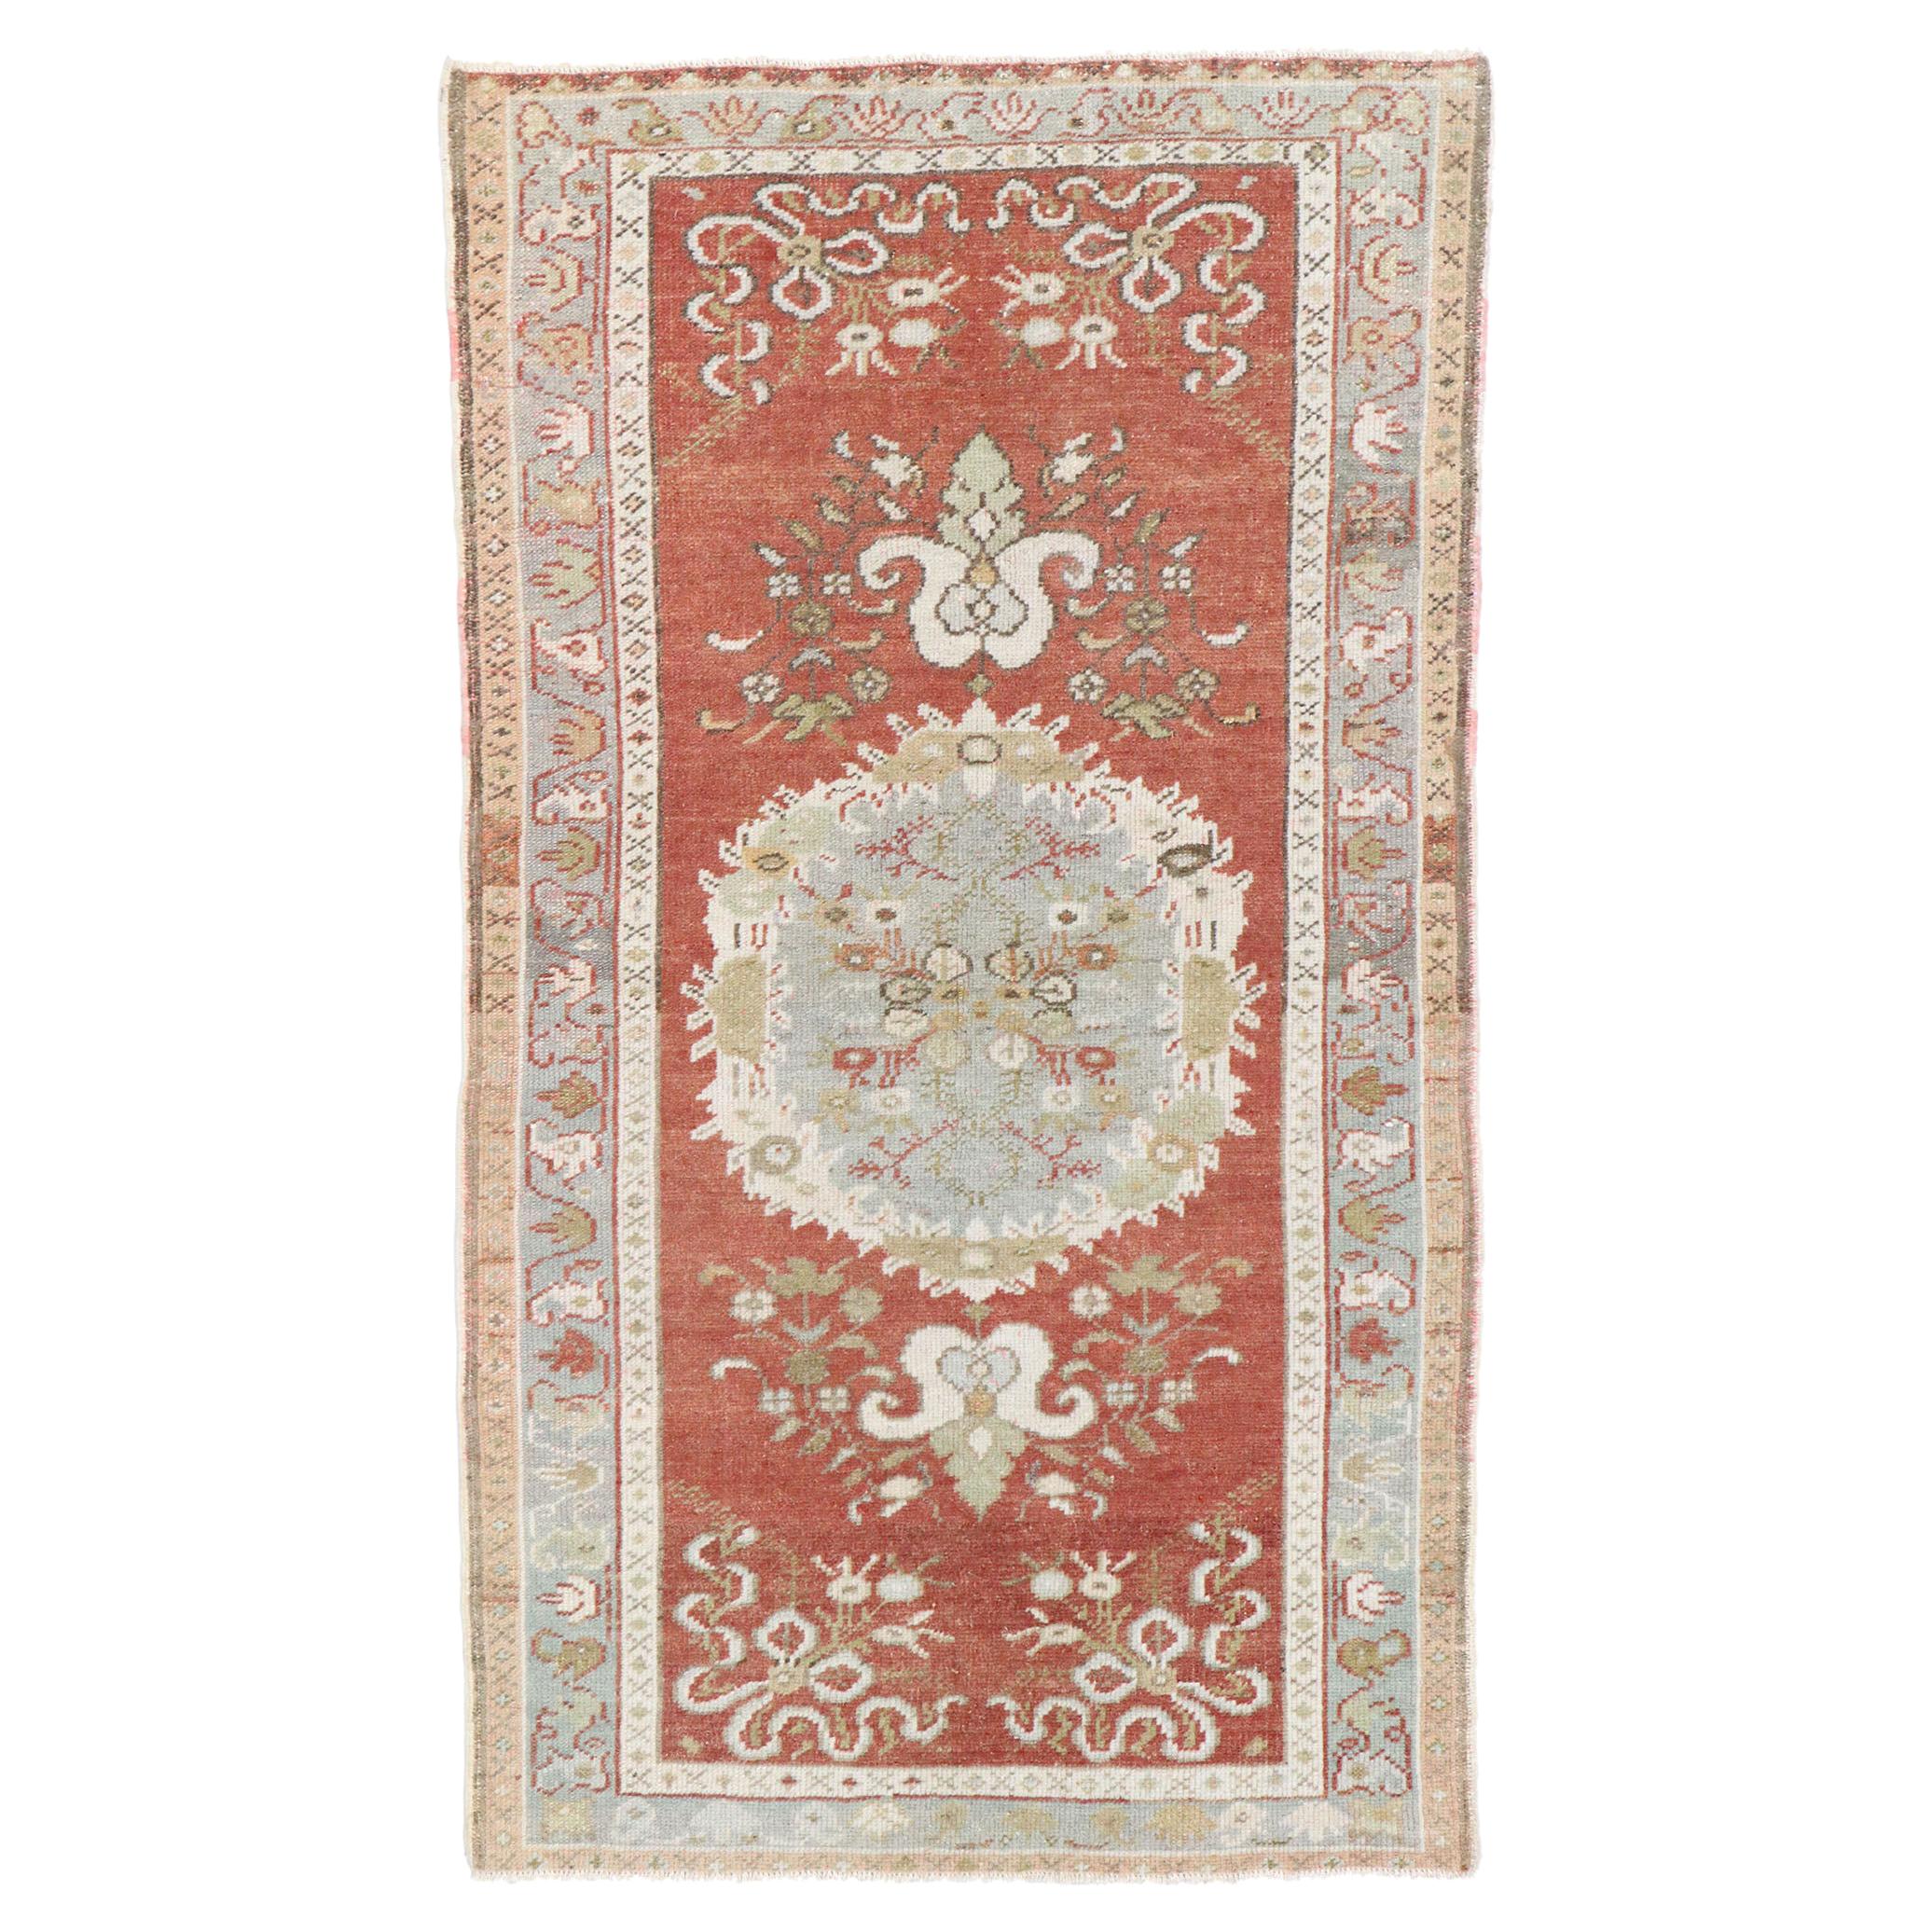 Vintage Turkish Oushak Rug with Rustic French Rococo Style